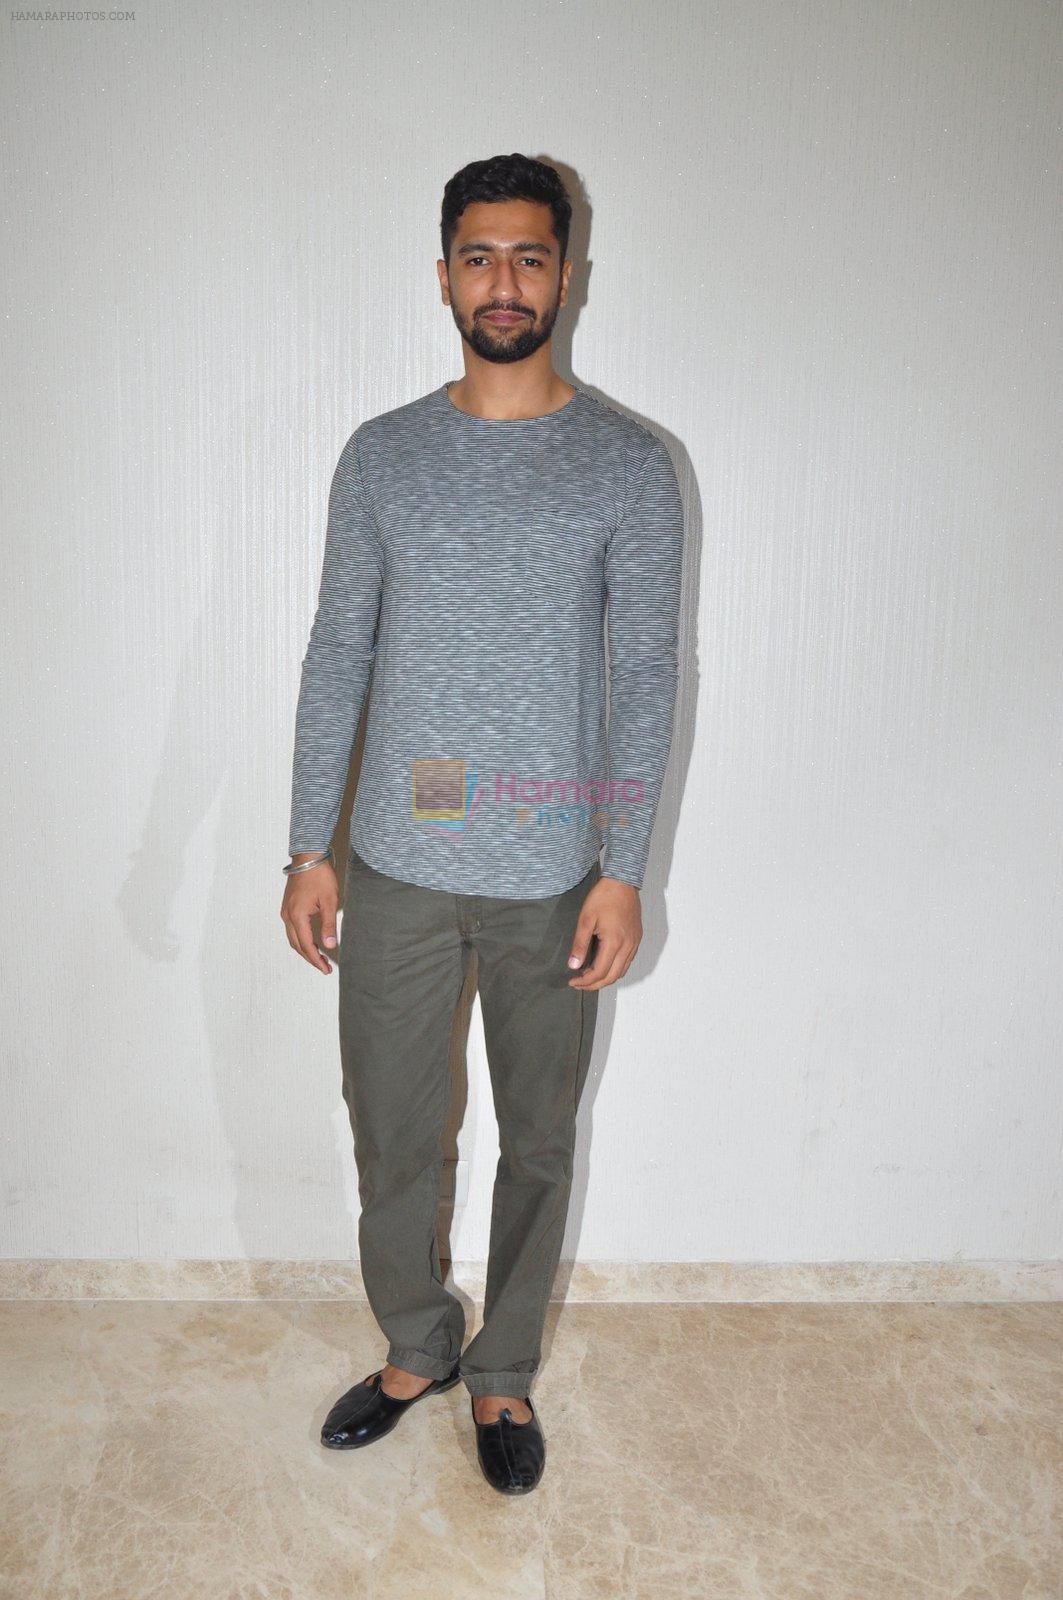 Vicky Kaushal at Dear Dad film screening on 11th May 2016